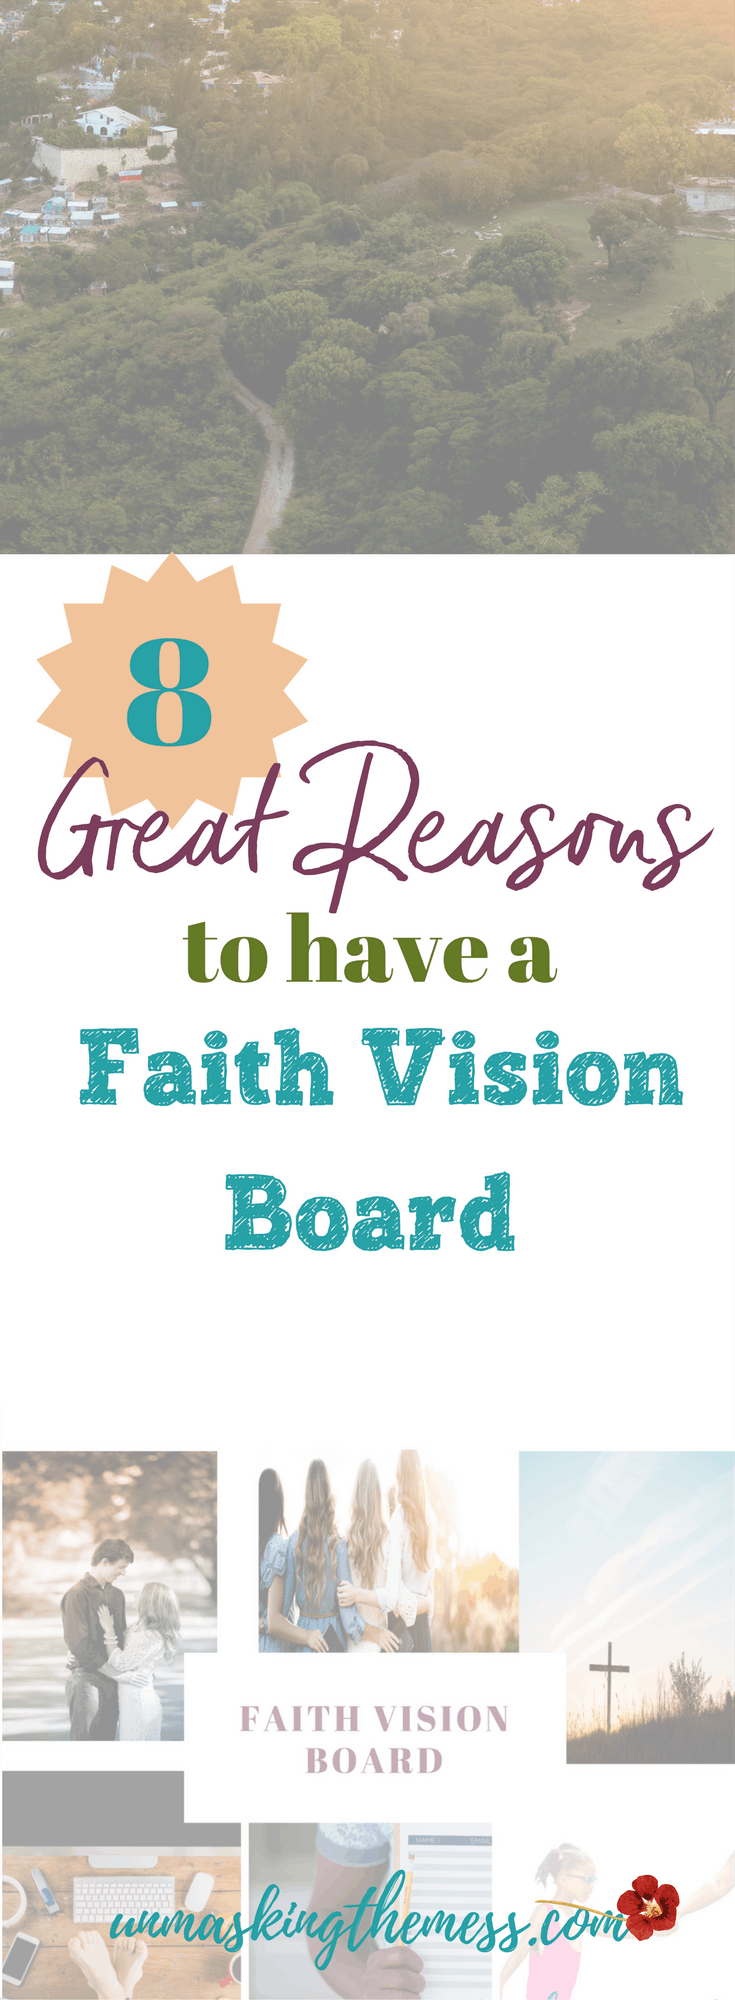 8 Great Reasons to have a Faith Vision Board. I get so caught up in what I see and then I assimilate it into the truth of what my eyes tell me. I’m suffering from tunnel vision most days, and I succumb to a wrong perspective.